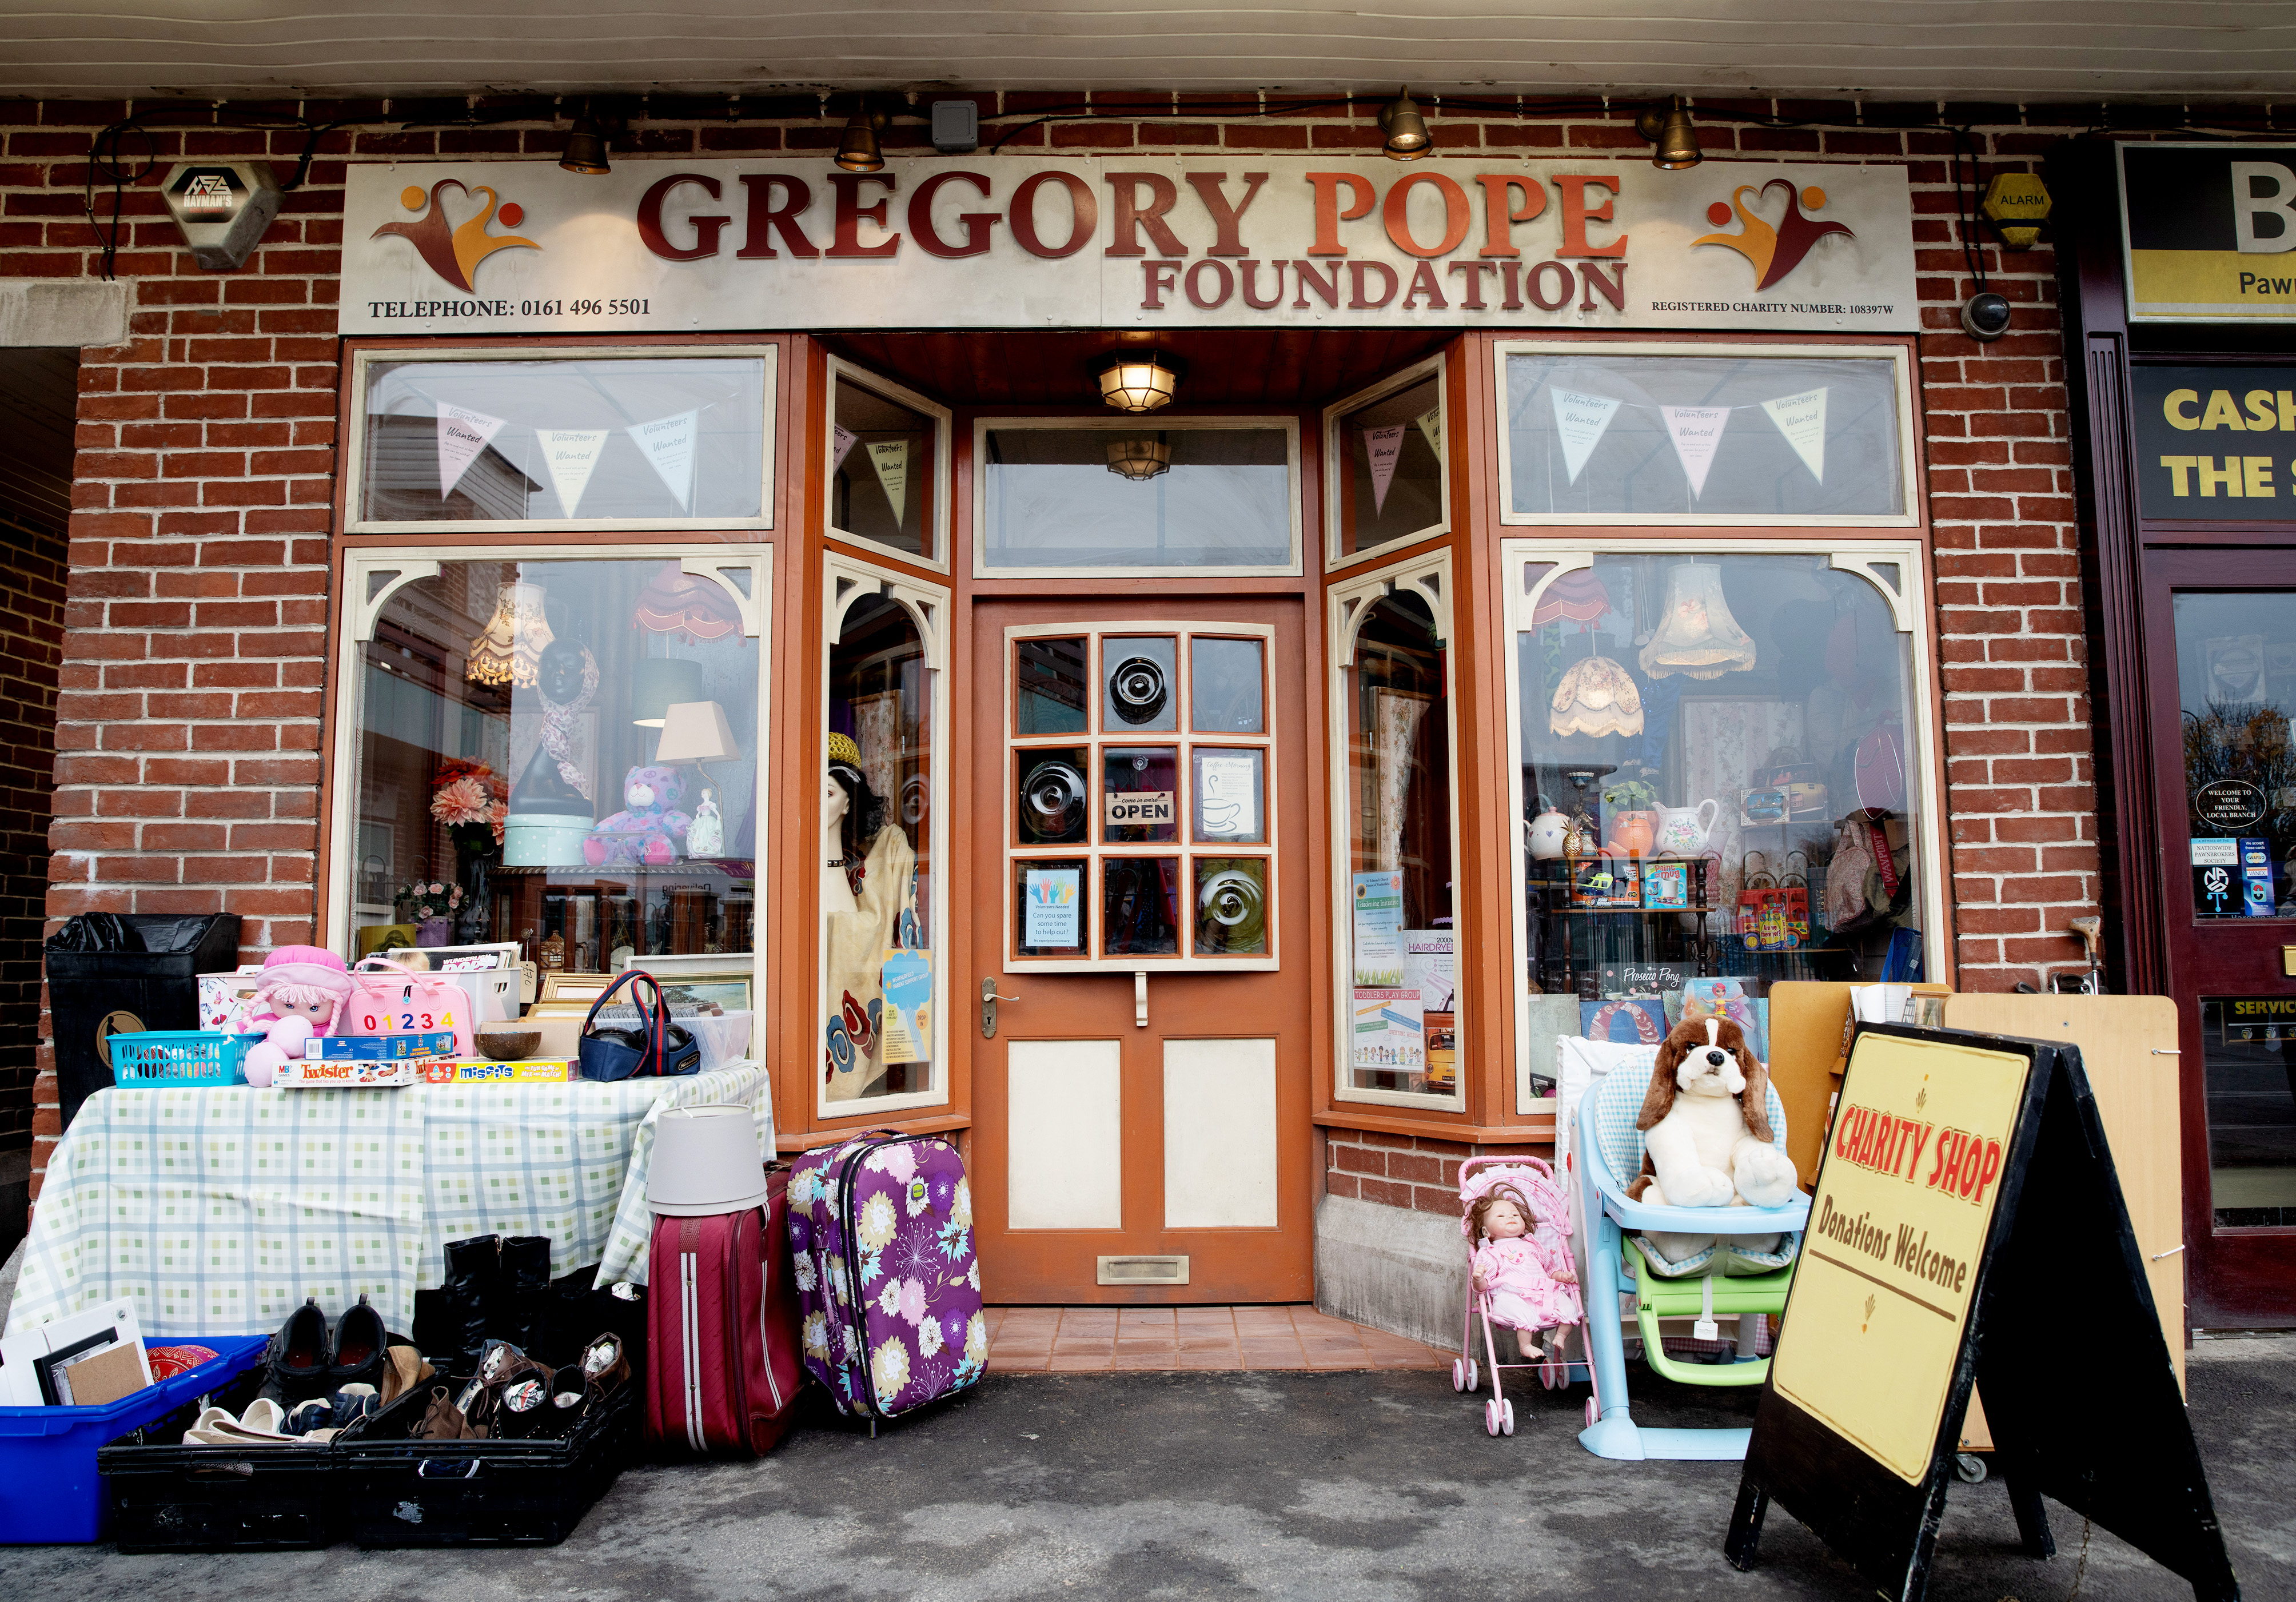 The Gregory Pope Foundation charity shop in the new Weatherfield Precinct set (ITV/PA)